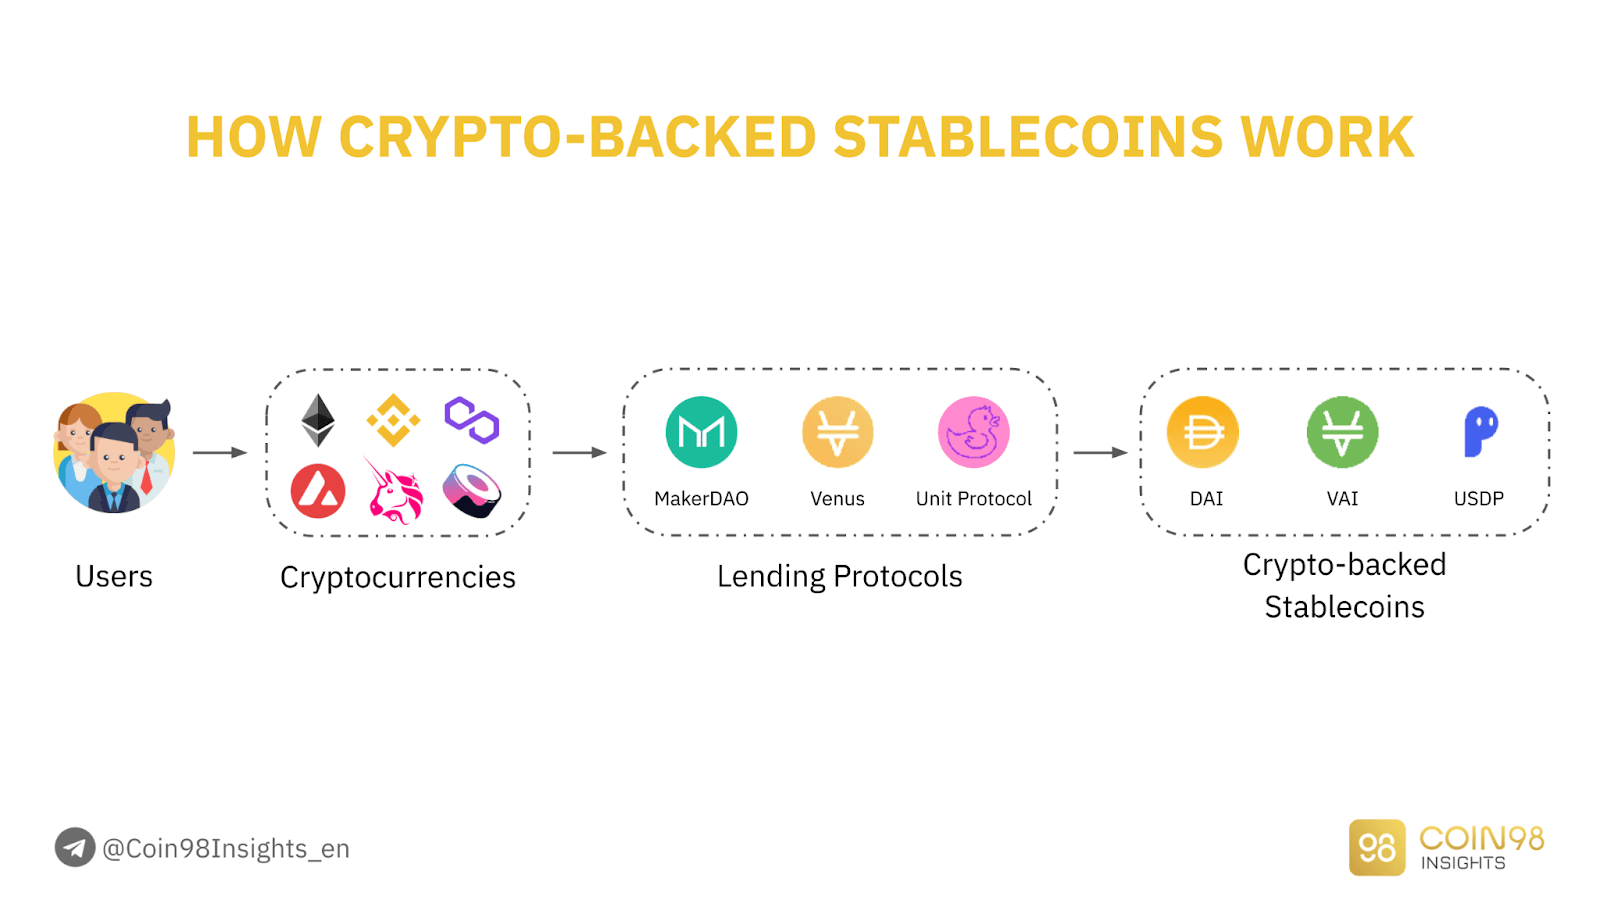 commondity backed stablecoin